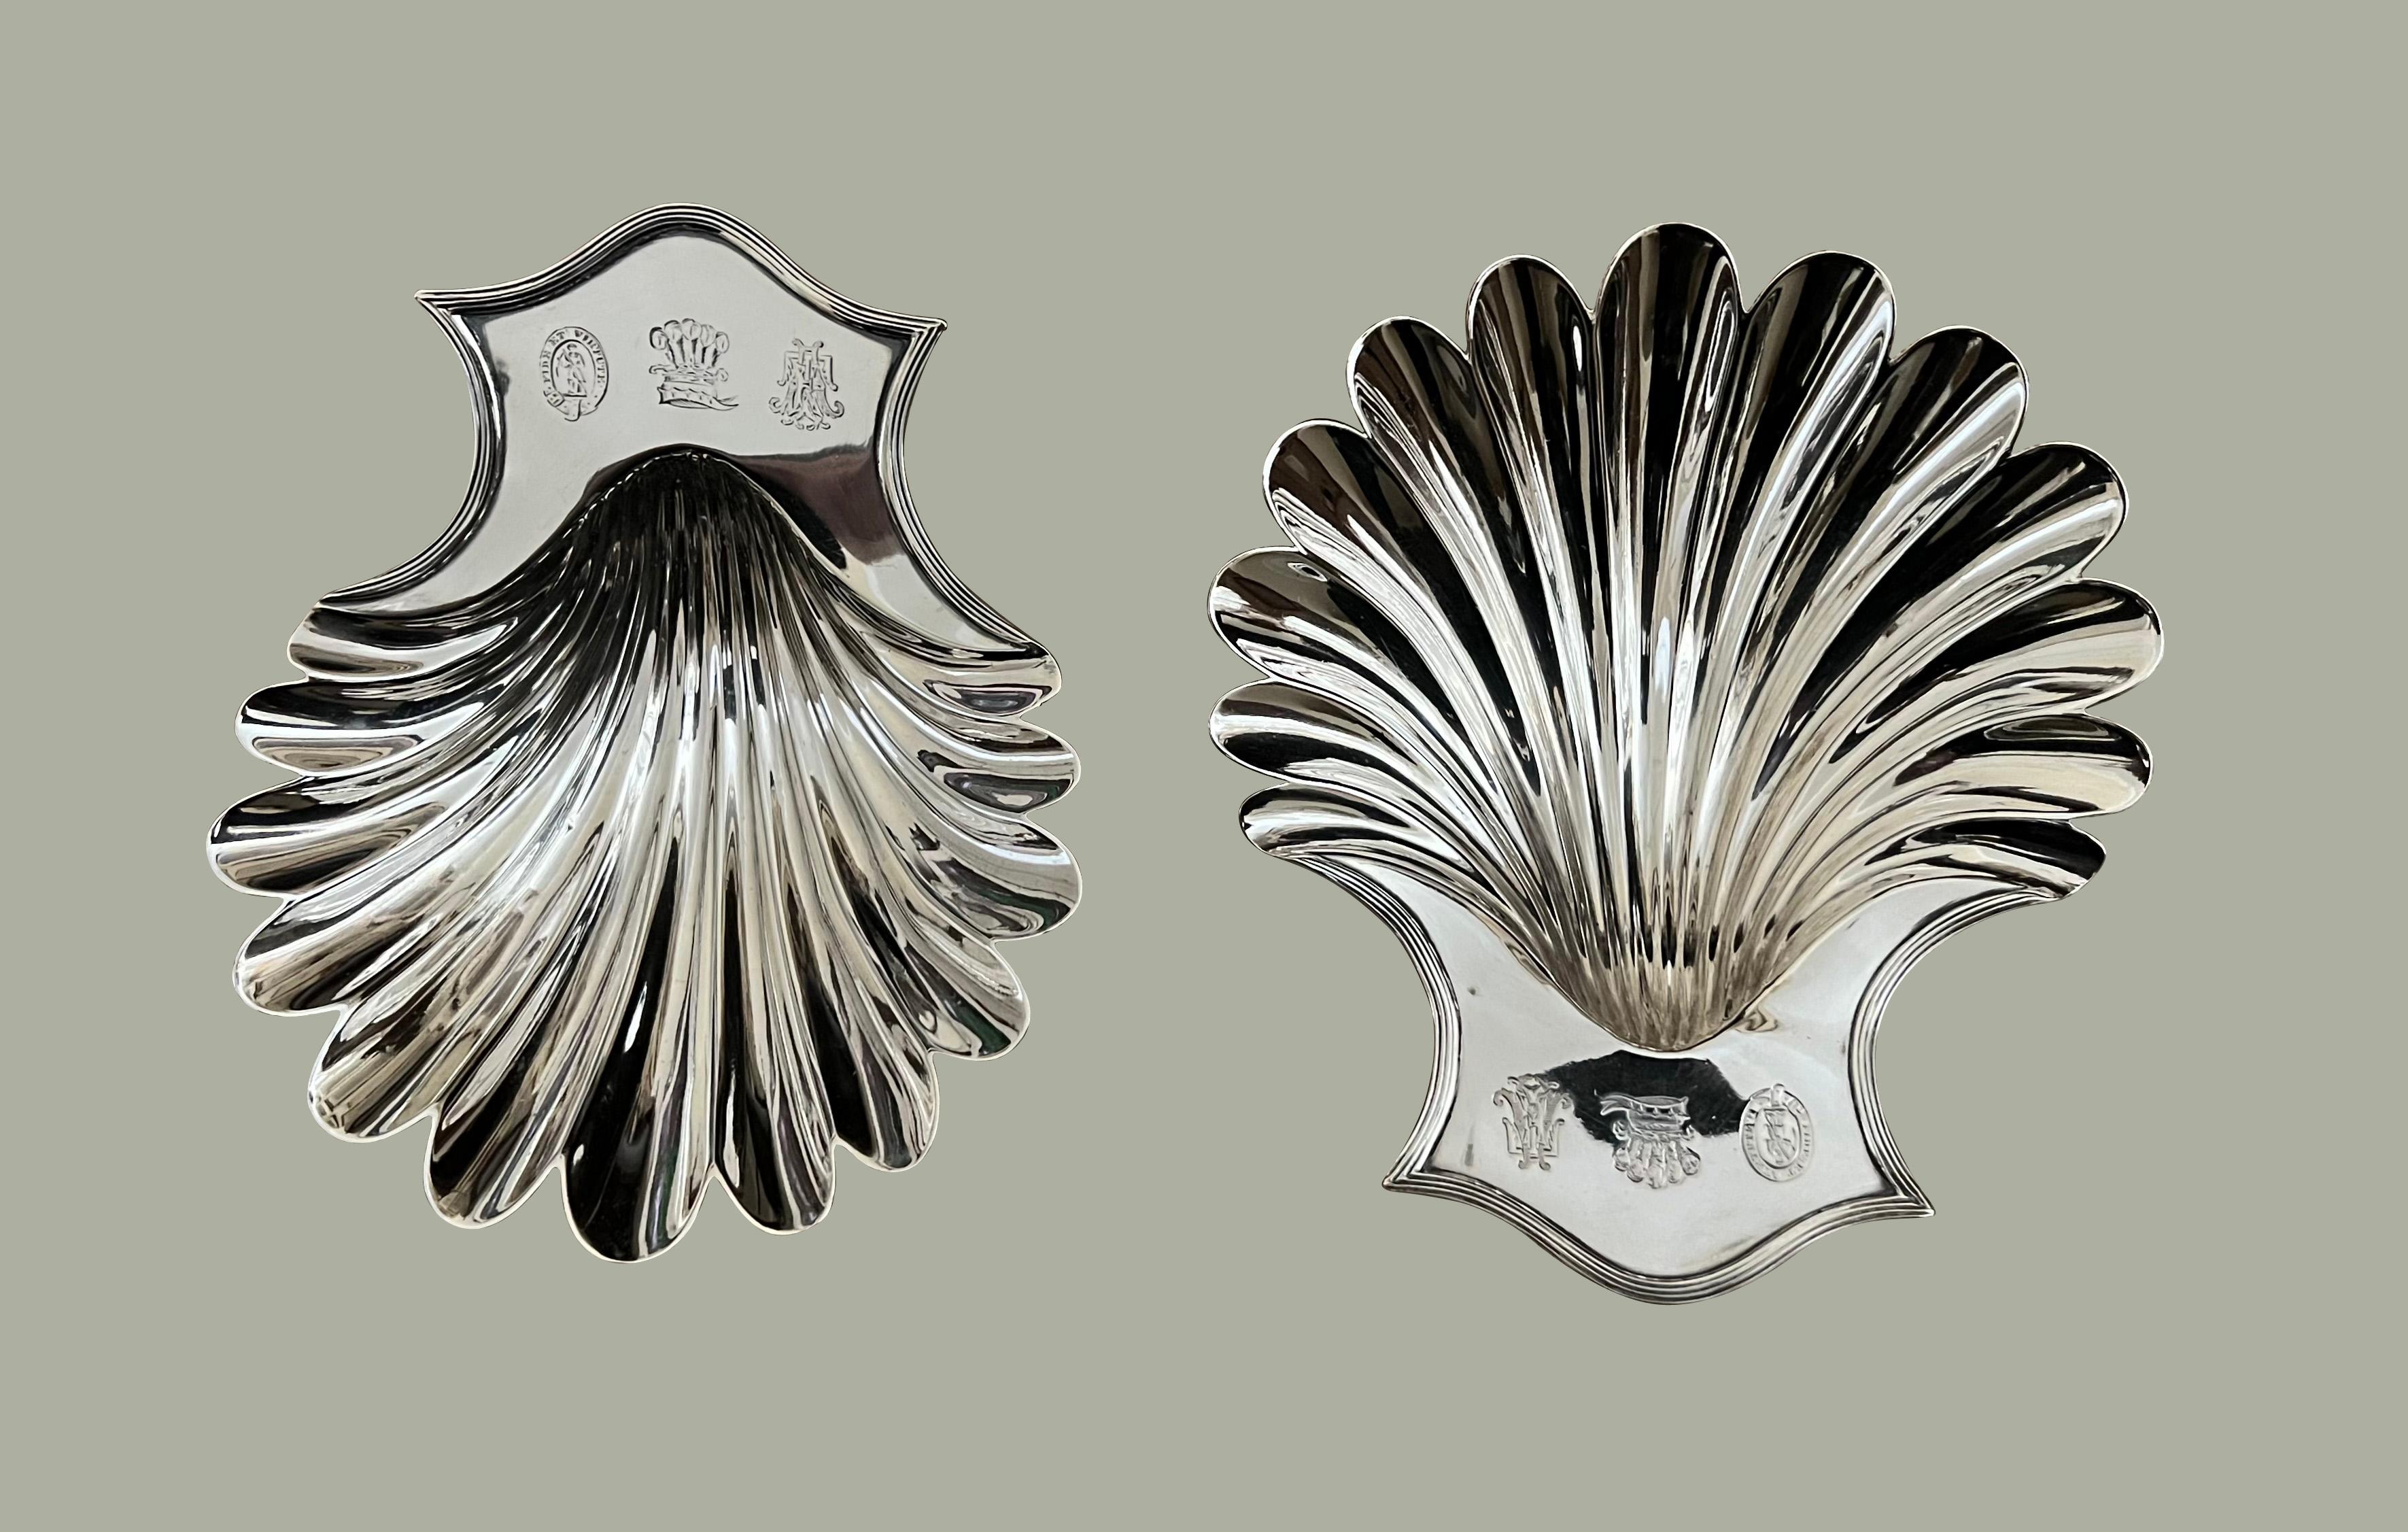 A fine pair of George III sterling silver butter dishes of shell form made by and fully hallmarked for Peter, Ann & William Bateman, London 1802. The Bateman family of silversmiths was very well-known in their time in part because Ann Bateman was